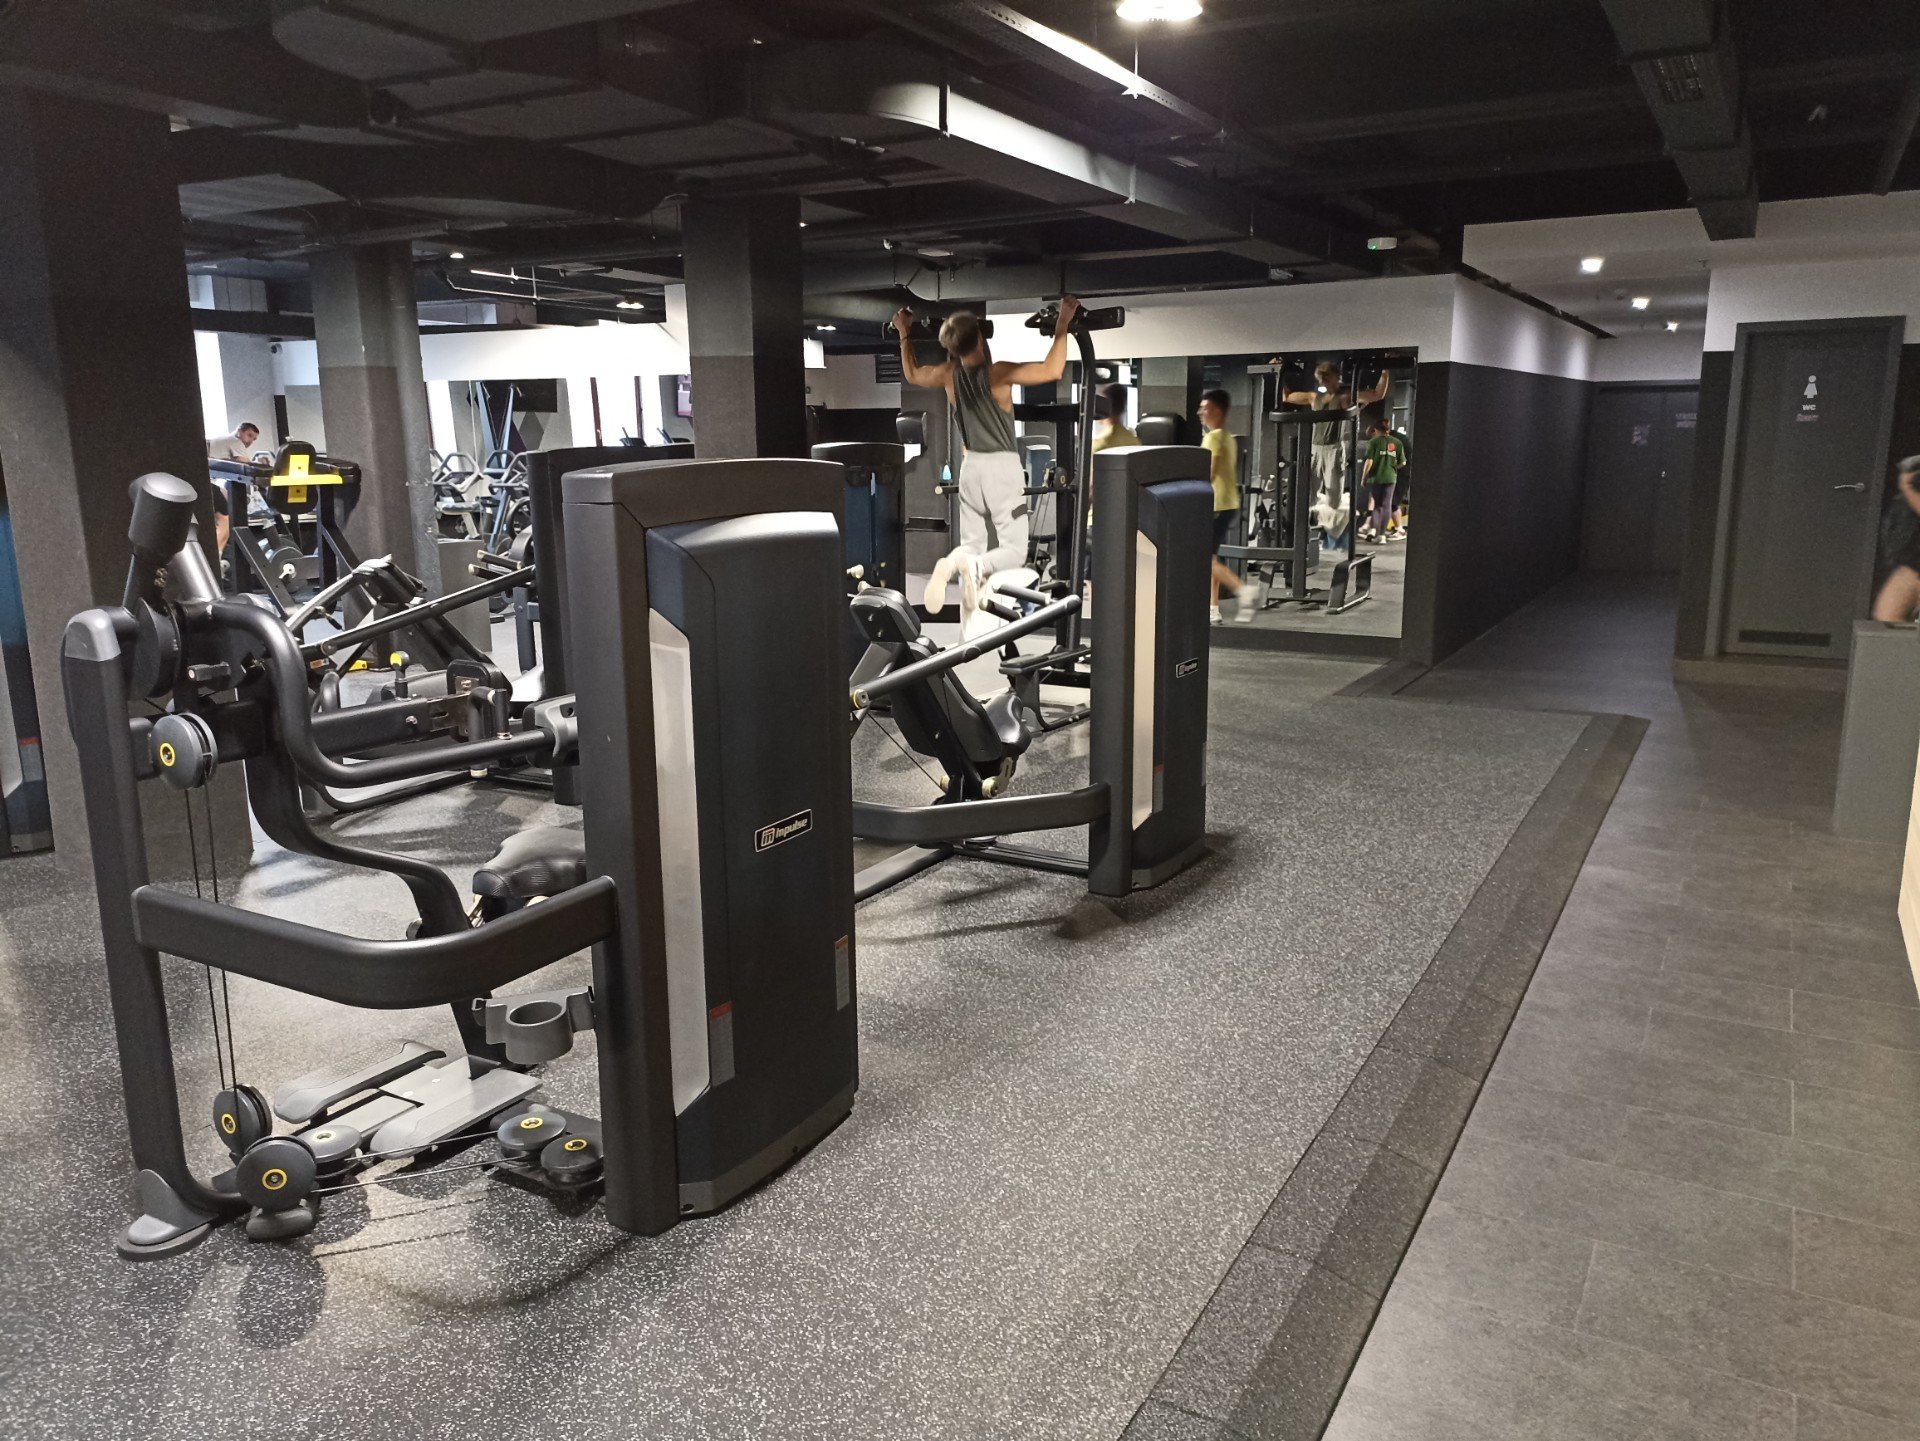  VICTORY FITNESS OC PLAZA project, with the GELFLOOR FIT PUZZLE panels of the GELPO company